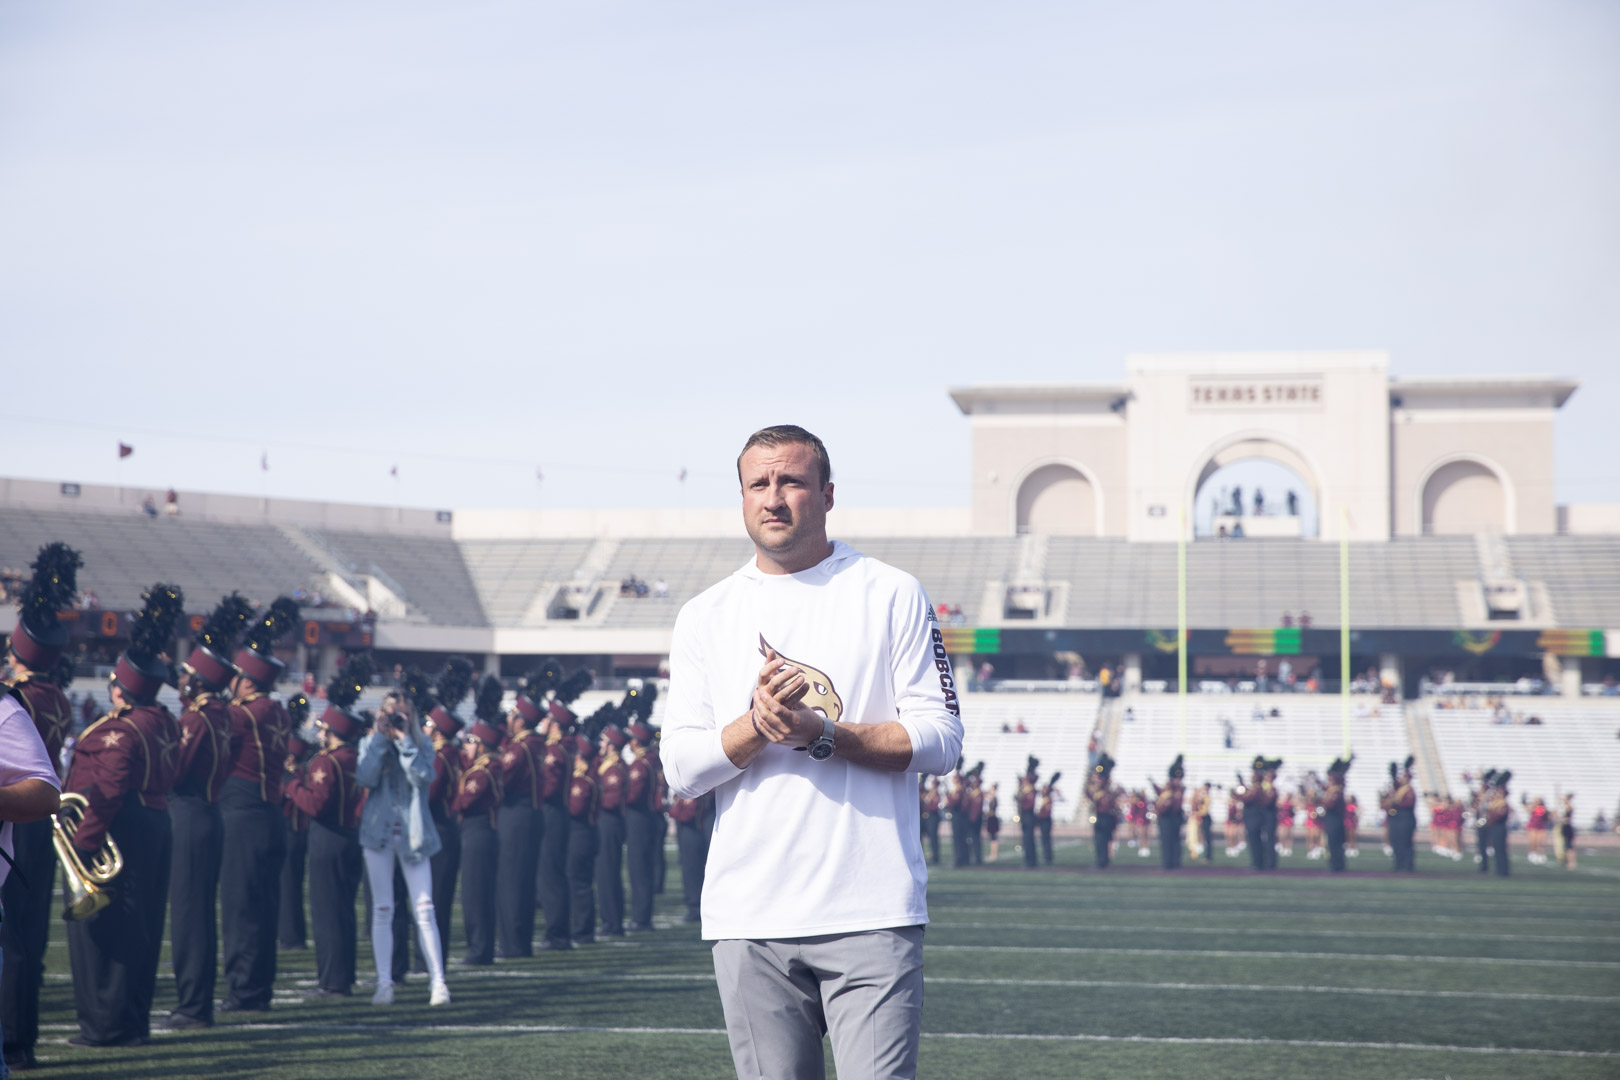 Jake Spavital stands on the field, looking towards the camera at the end zone complex with the Texas State Marching Band lines the field behind him.